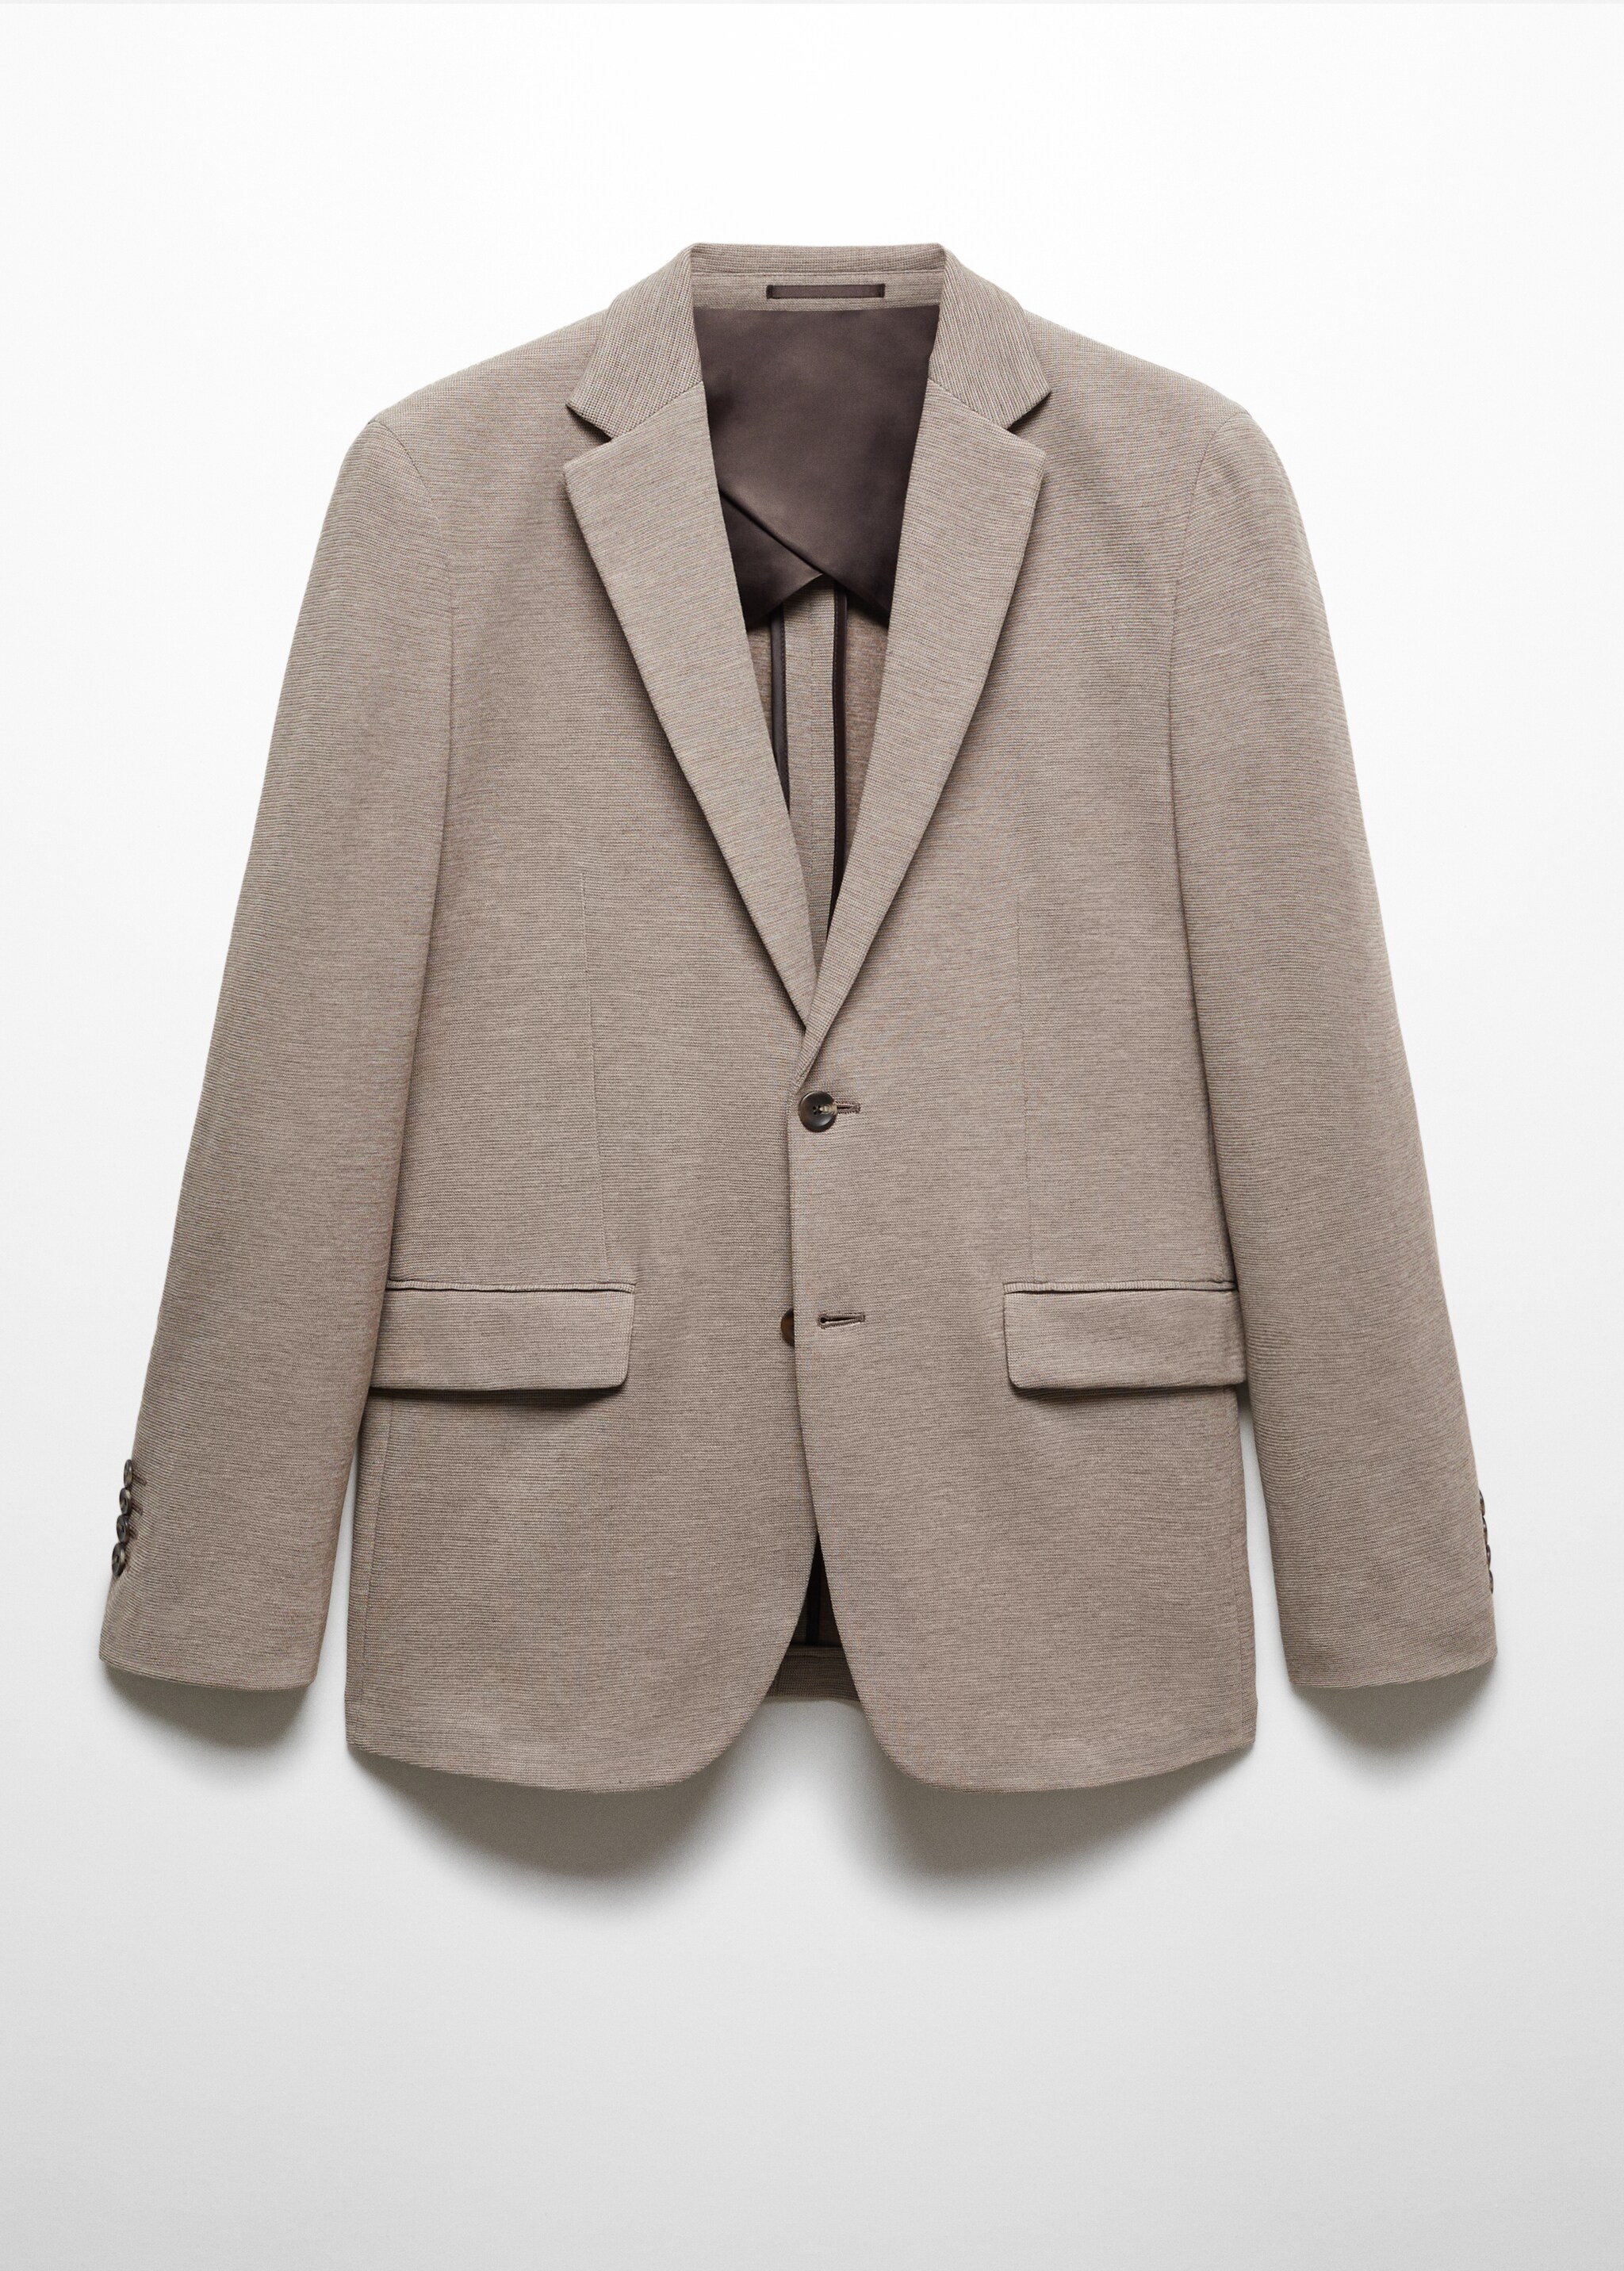 Structured slim fit cotton blazer - Article without model